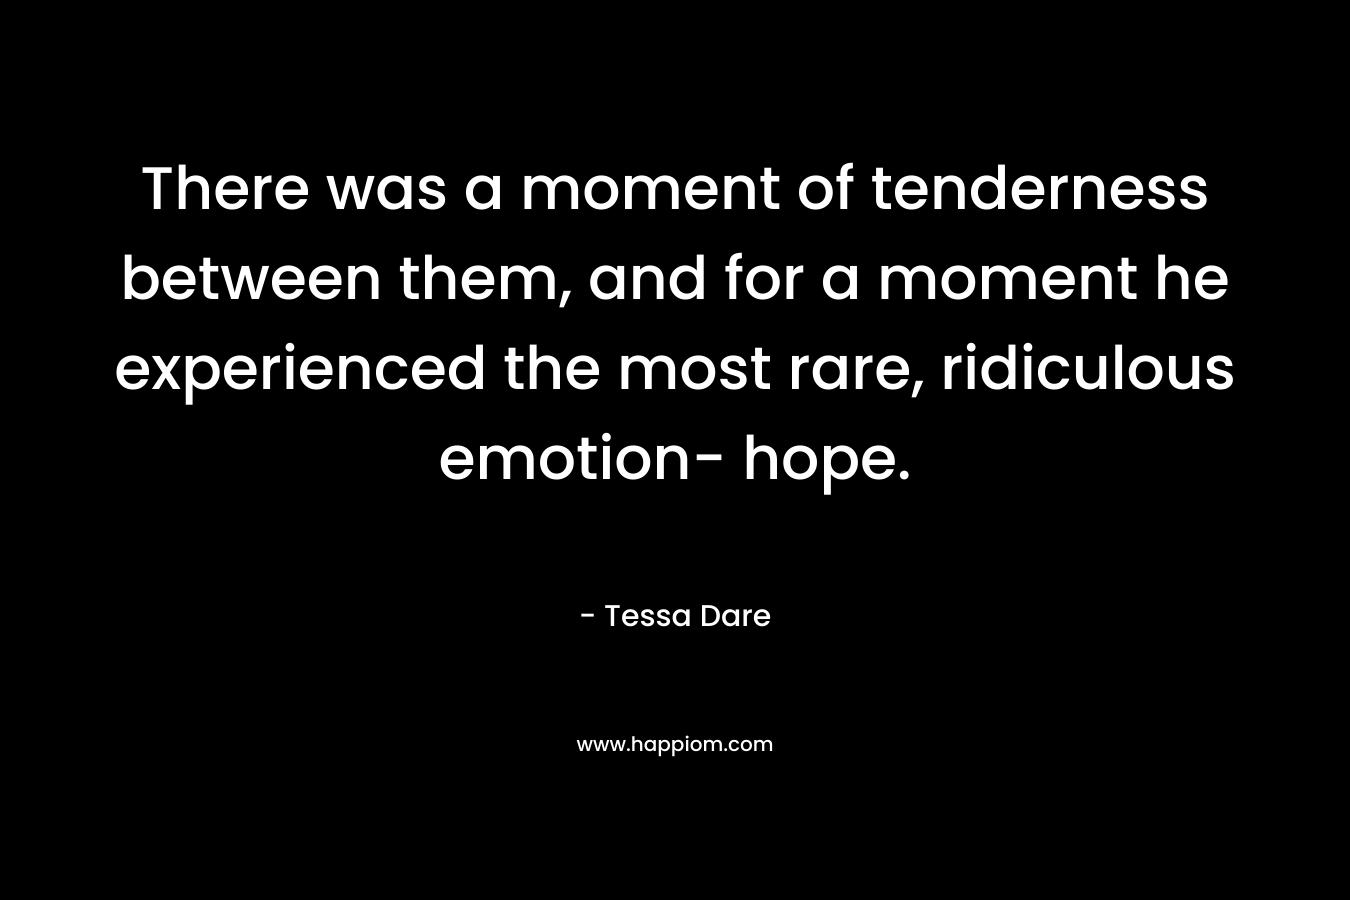 There was a moment of tenderness between them, and for a moment he experienced the most rare, ridiculous emotion- hope. – Tessa Dare